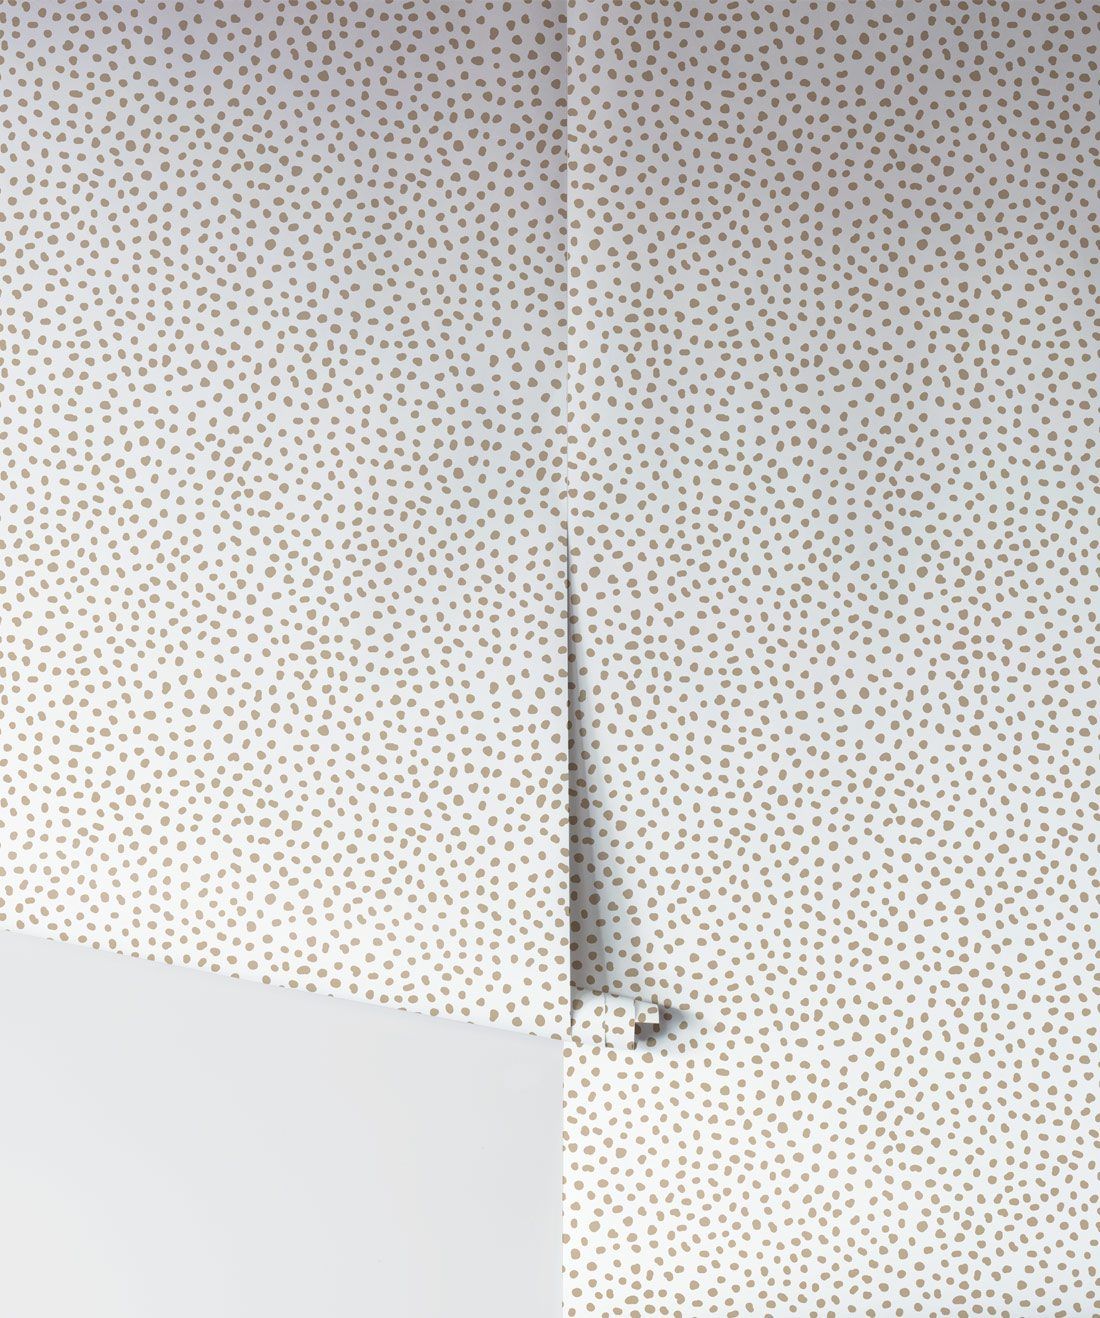 Huddy's Dots • Taupe • Spotted Wallpaper • Roll